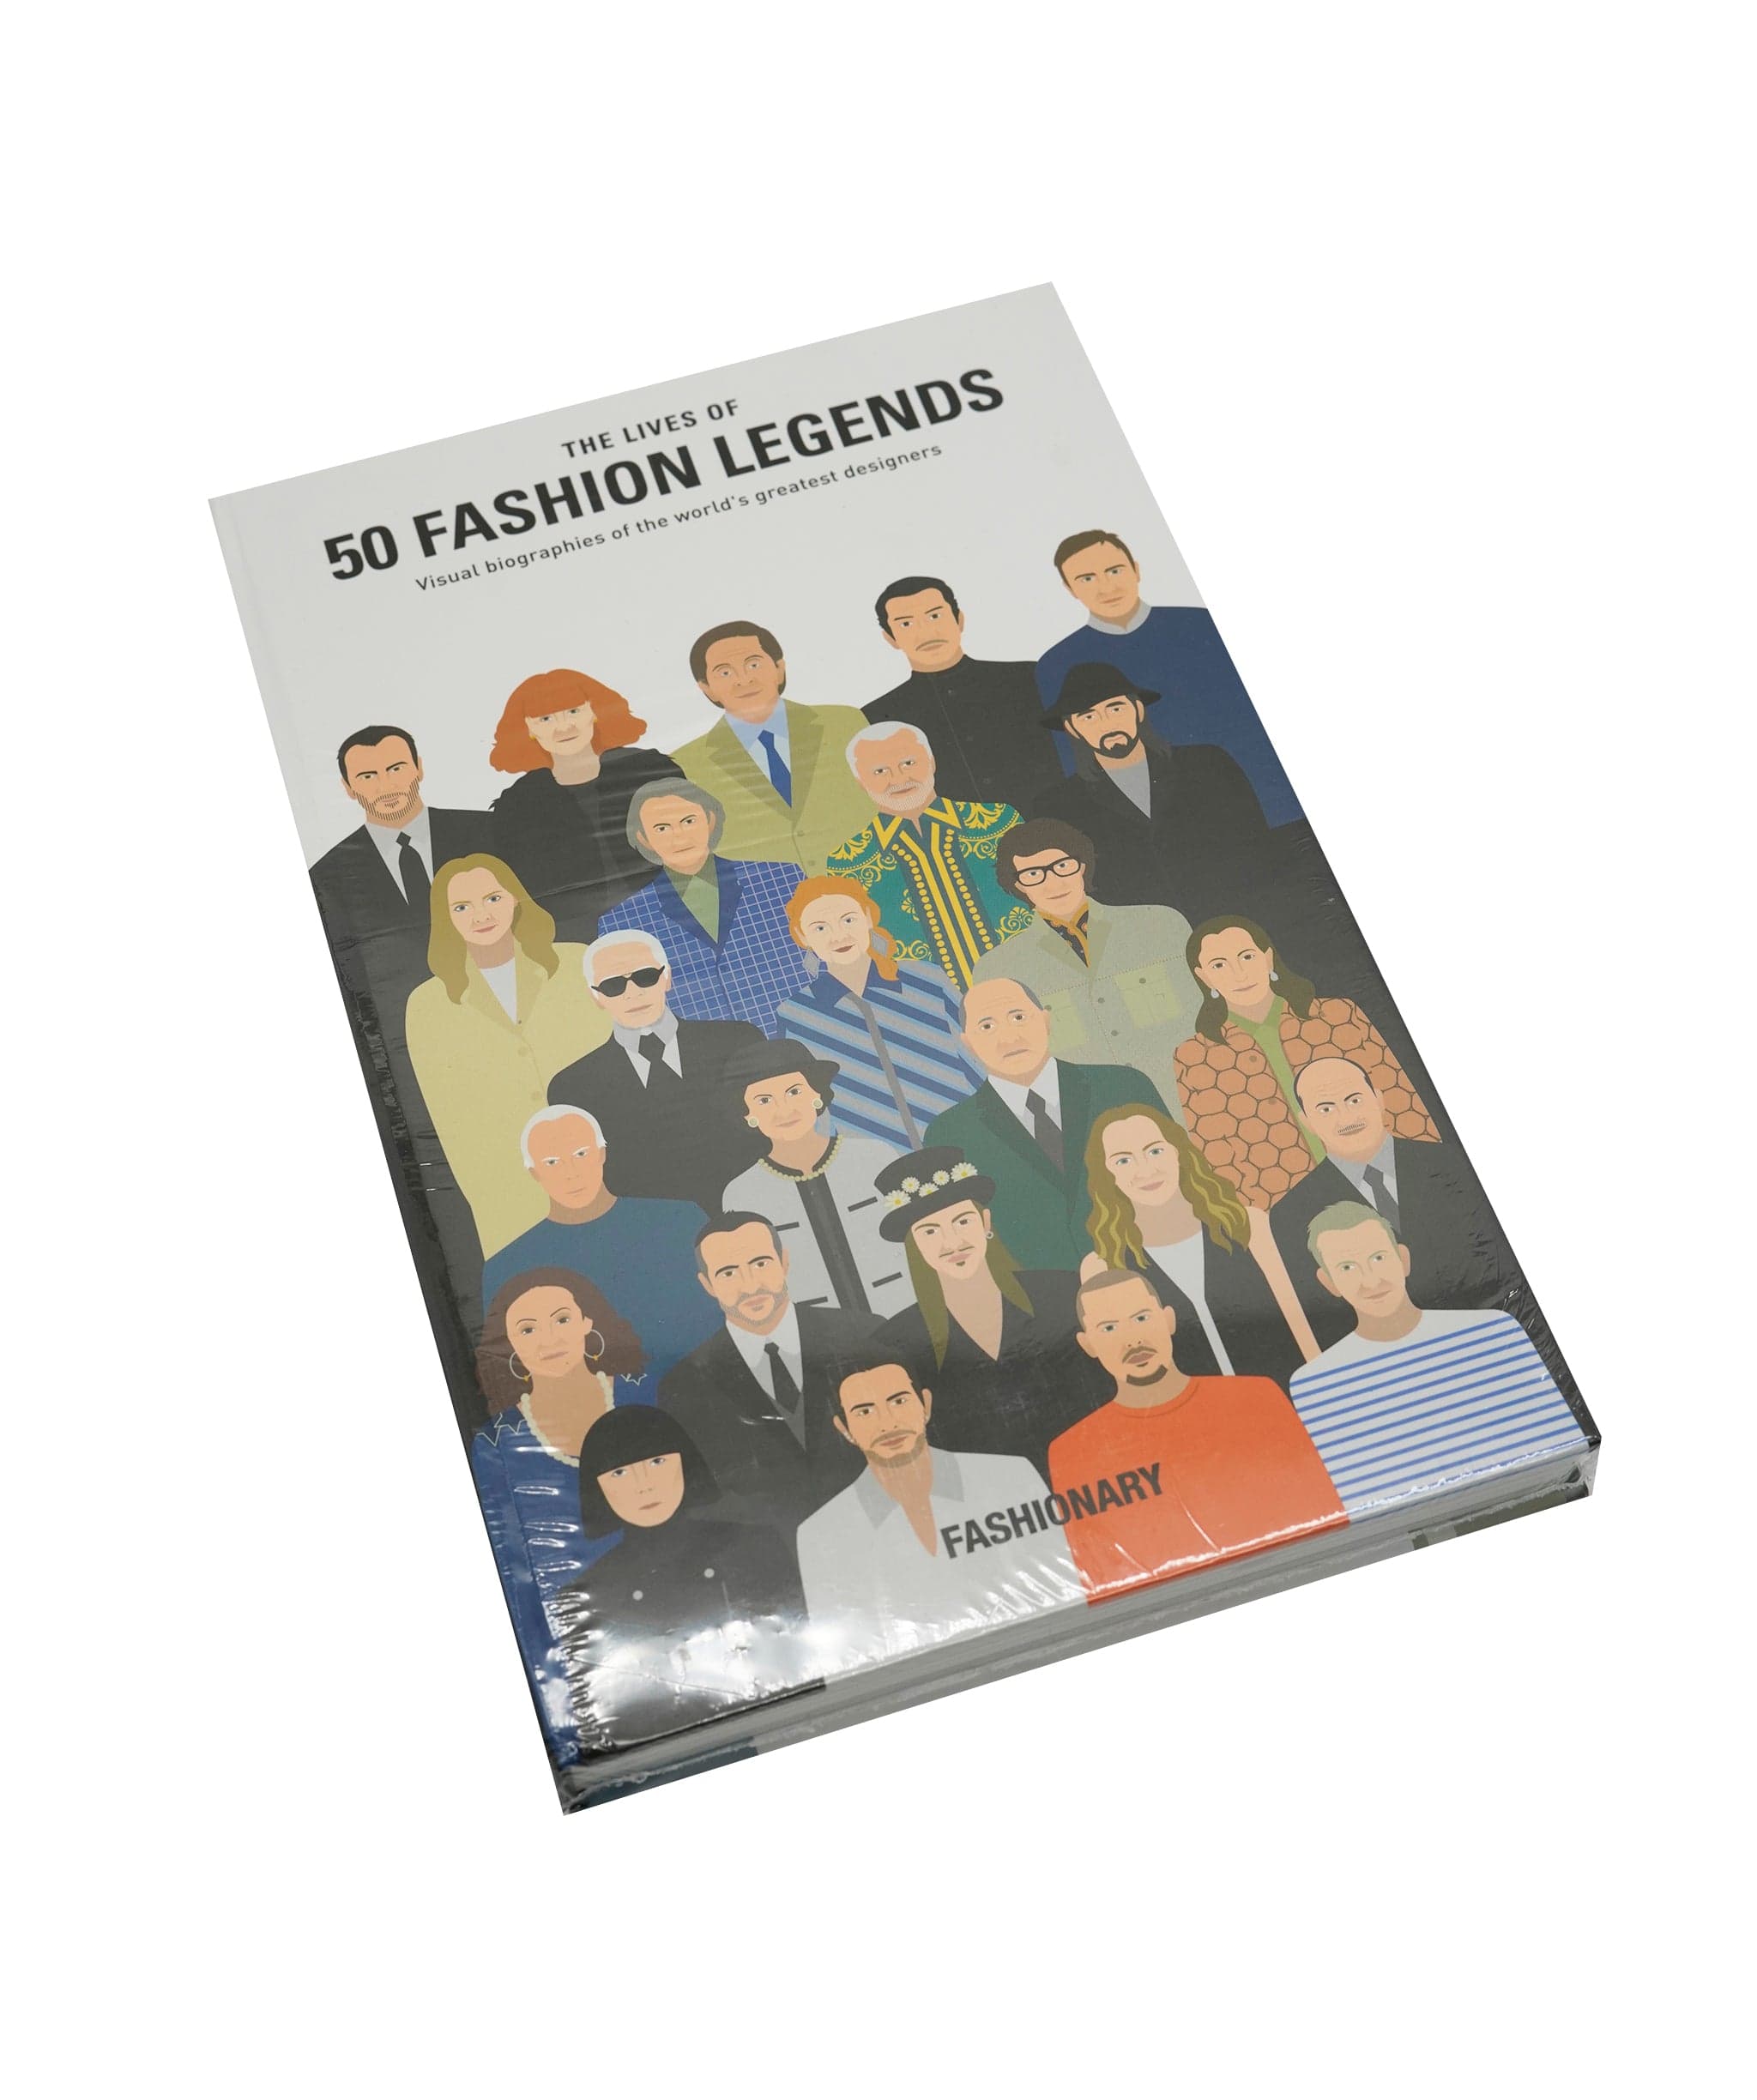 Thames and Hudson The Lives of 50 Fashion Legends AWL4253